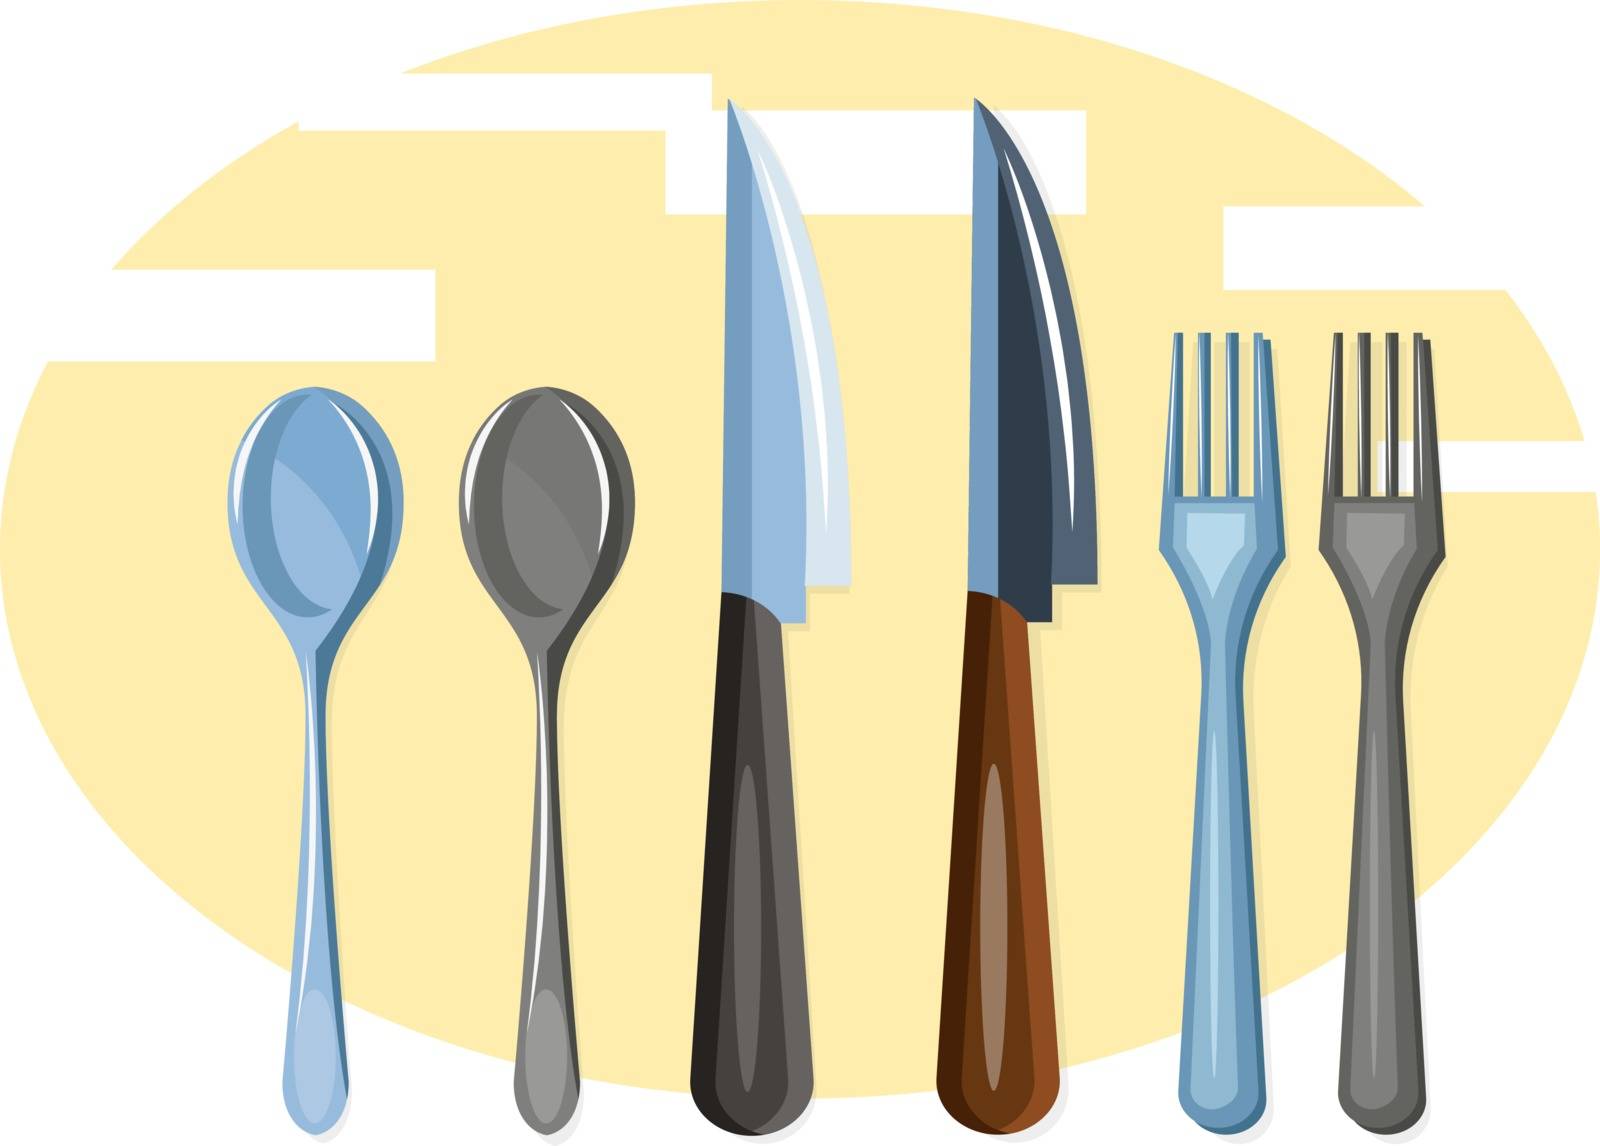 A Cutlery set with knifes spoons and forks vector color drawing or illustration.